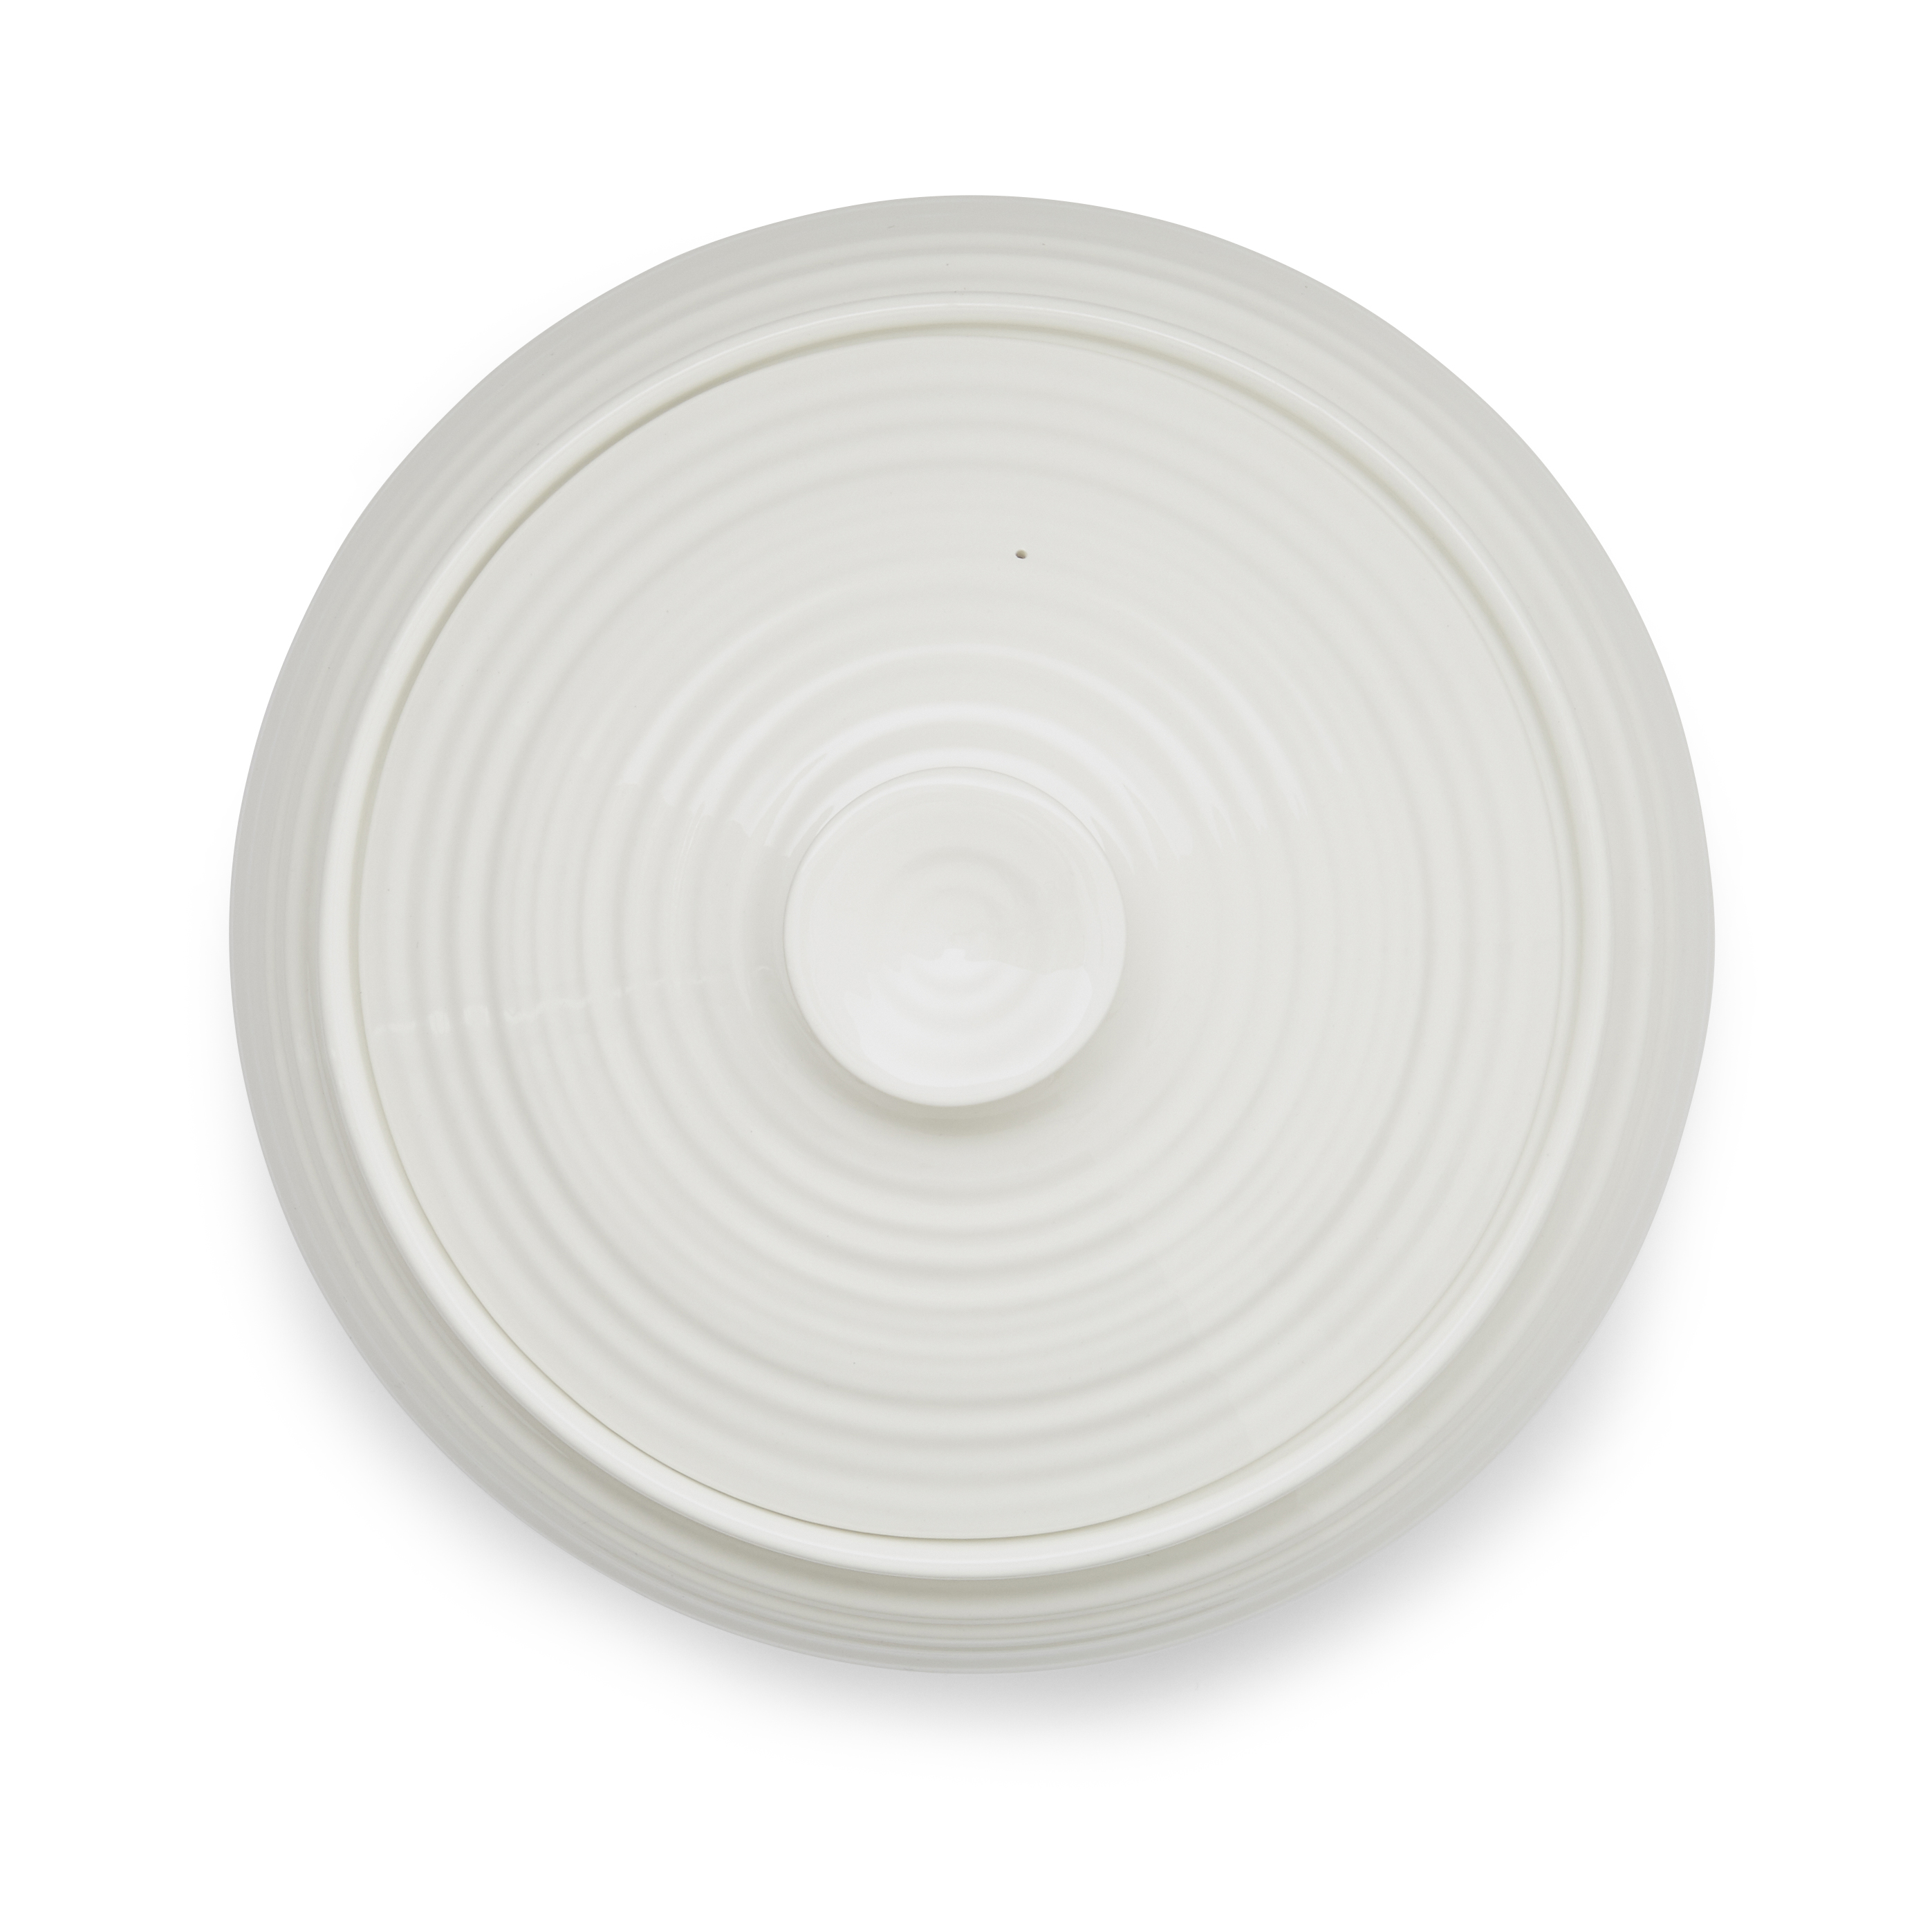 Sophie Conran for White Low Casserole 6 pint image number null